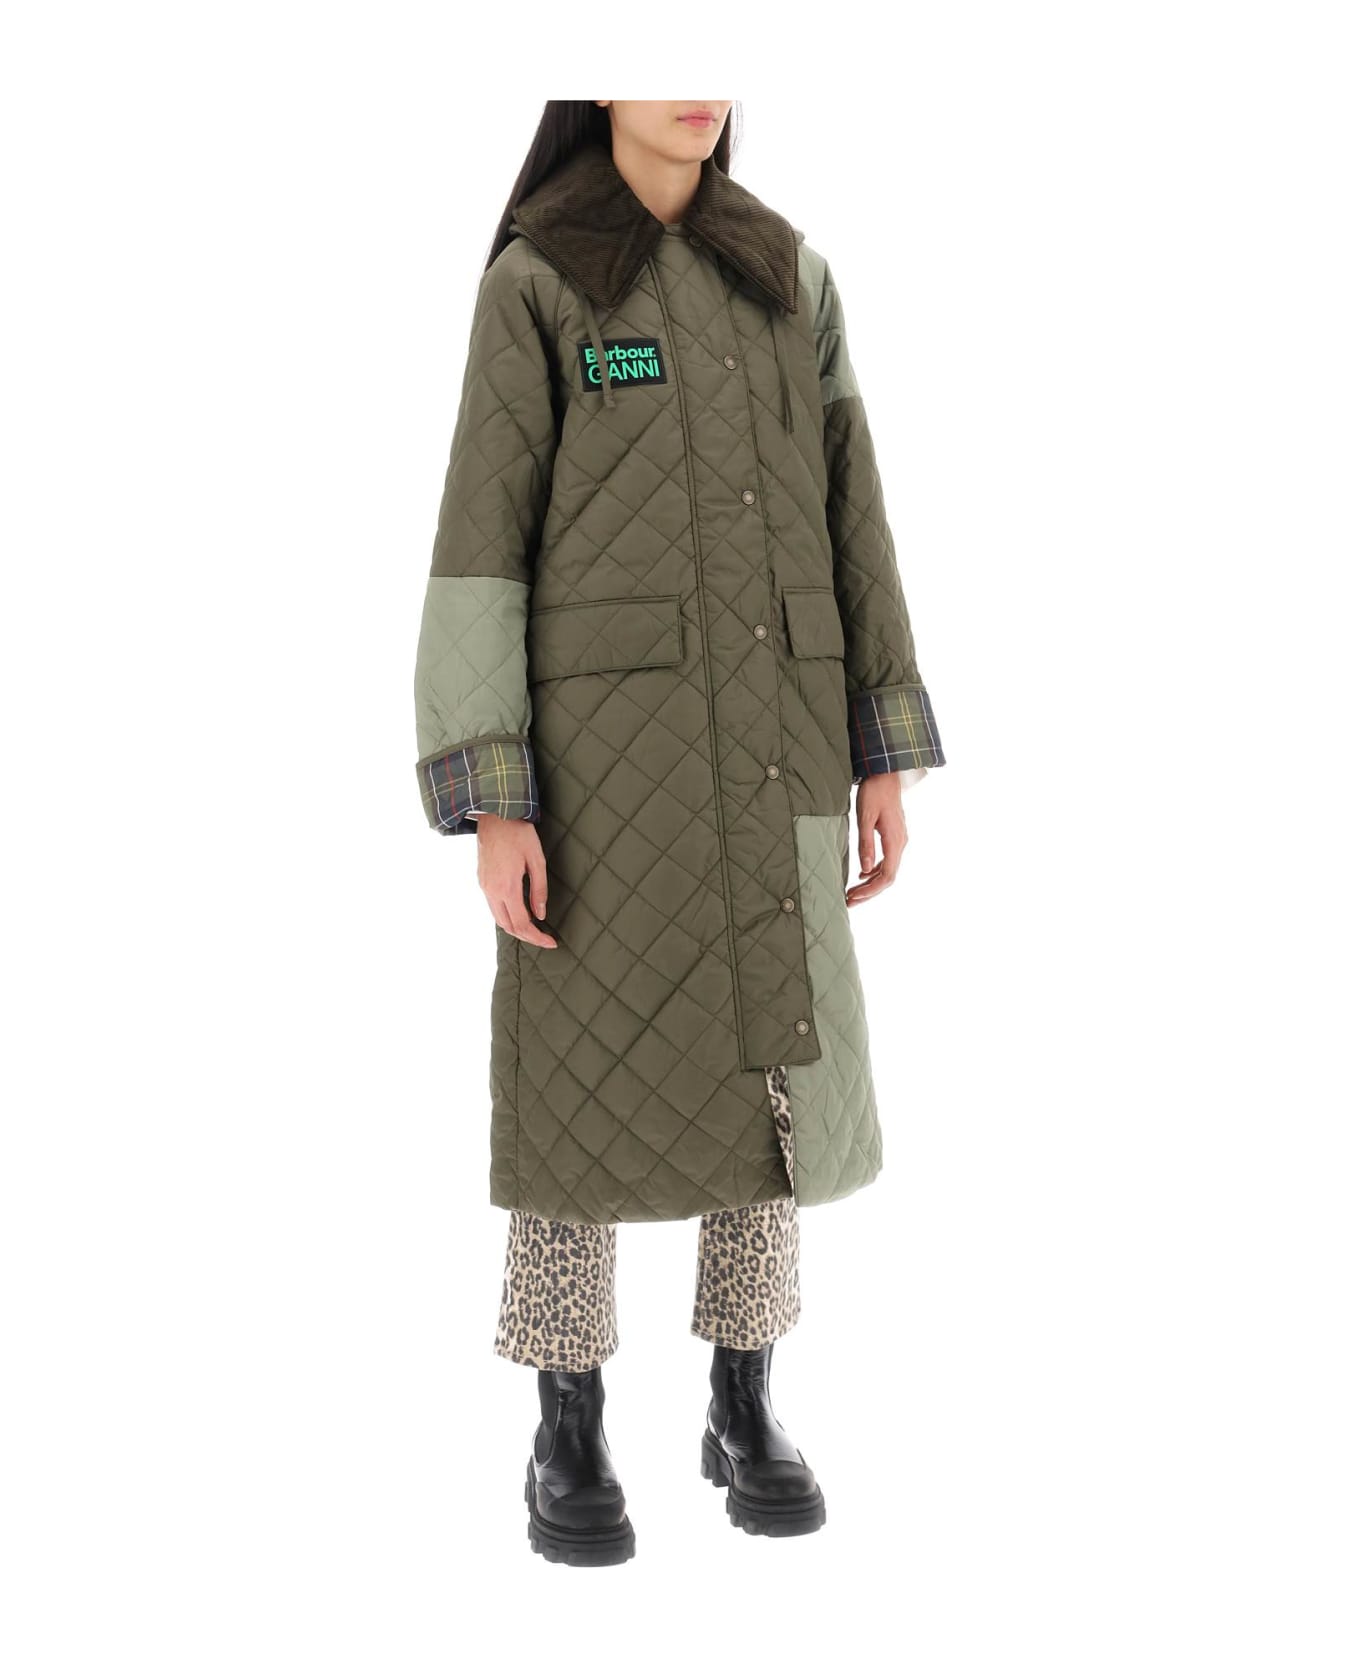 Barbour Burghley Quilted Trench Coat - FERN LT MOSS CLASSIC (Green)